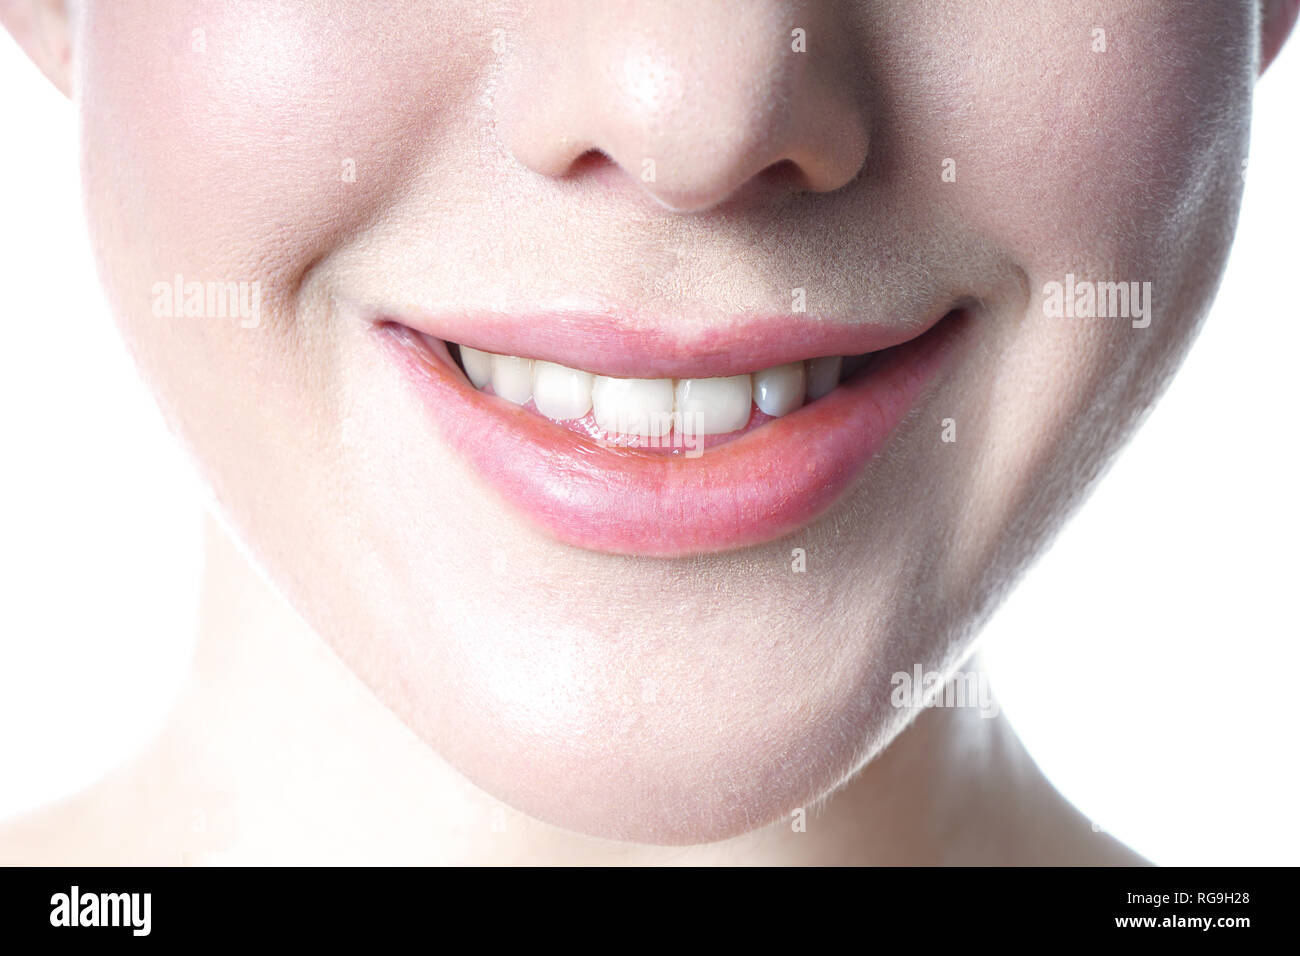 young woman with toothy smile close-up Stock Photo